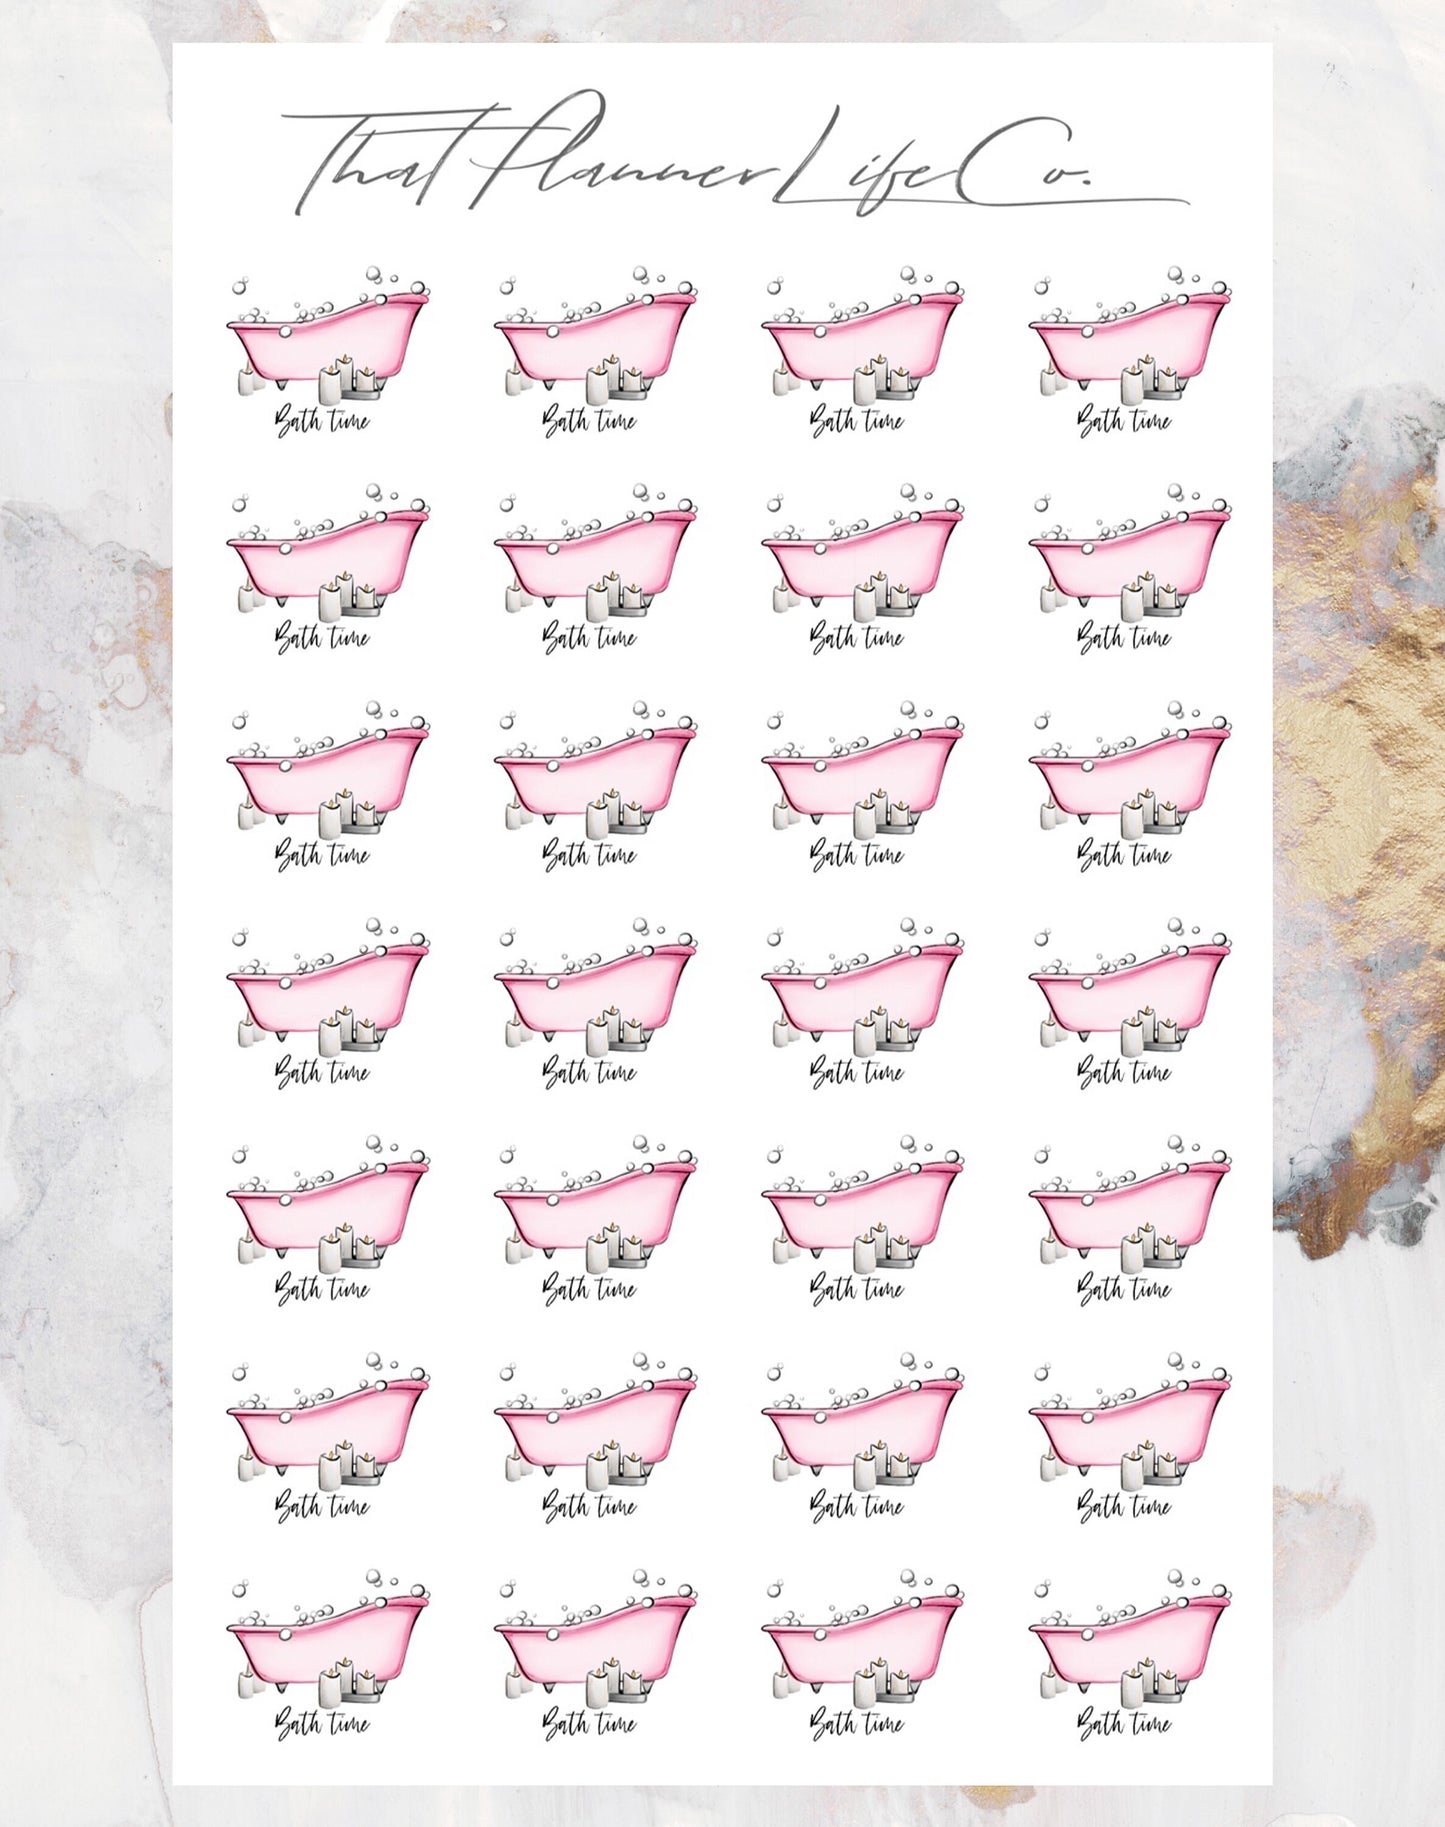 Bath Time Functional/Icon Stickers, Planner Stickers, Erin Condren